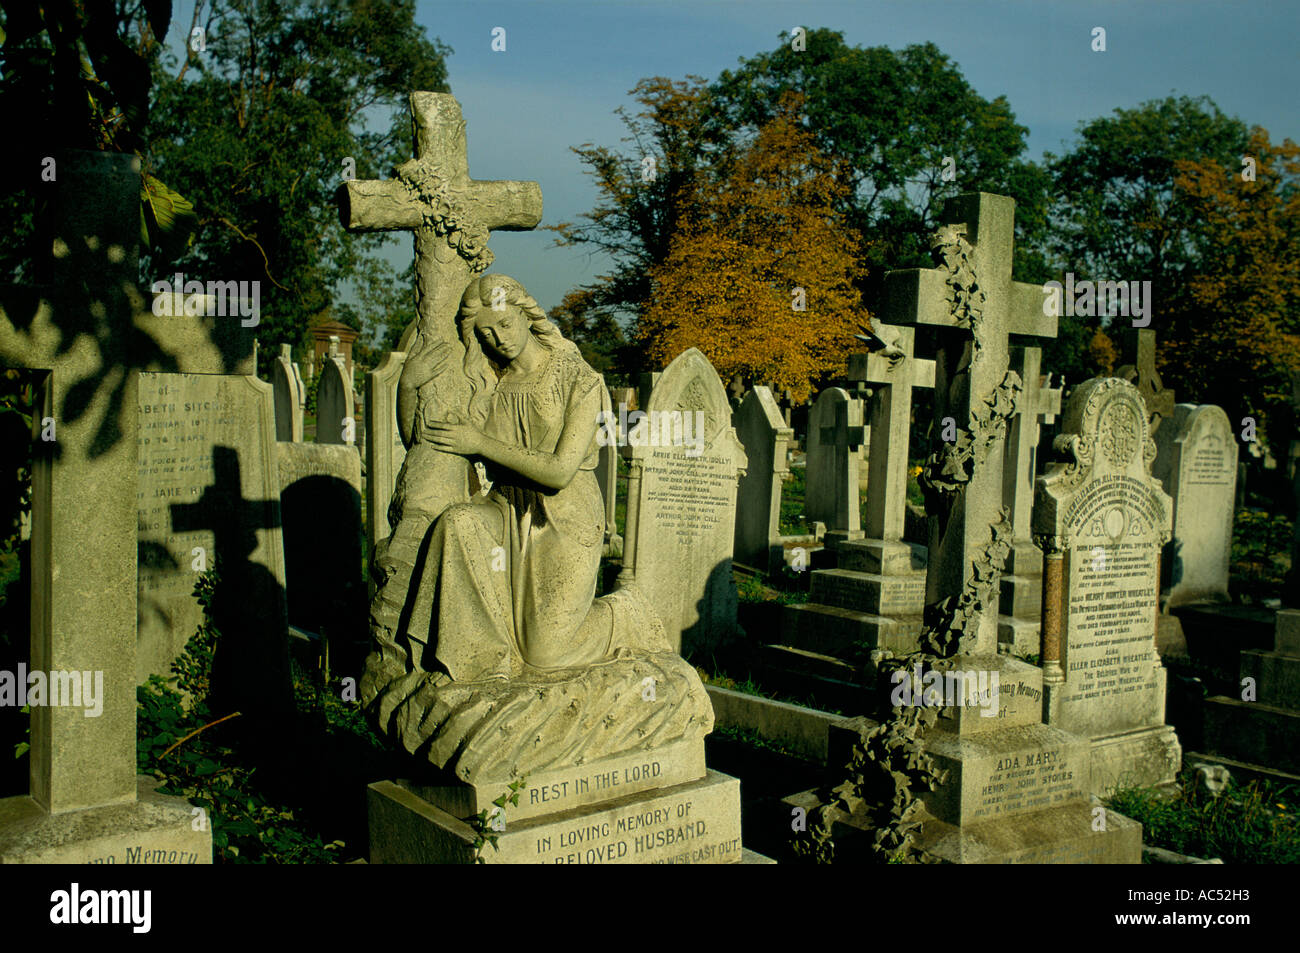 GRAVESTONES STATUES HEADSTONES CARVED STONE STATUES CROWDED TOGETHER IN WEST NORWOOD CEMETERY LONDON, 1993 Stock Photo